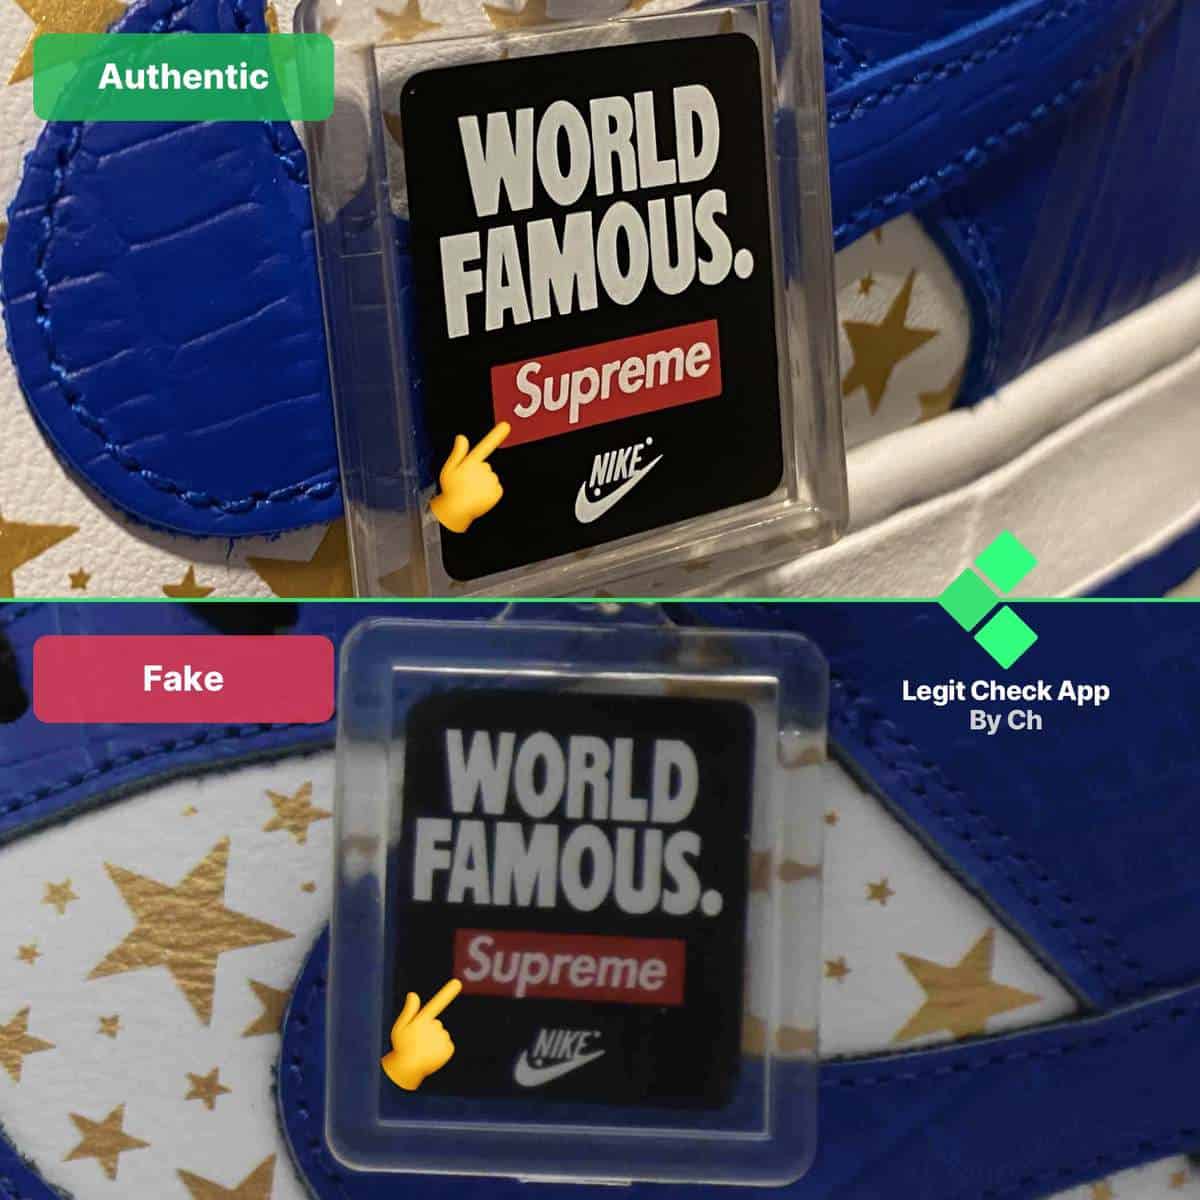 How To Spot & Identify The Fake Supreme Nike SB Dunk Low Rammellzee